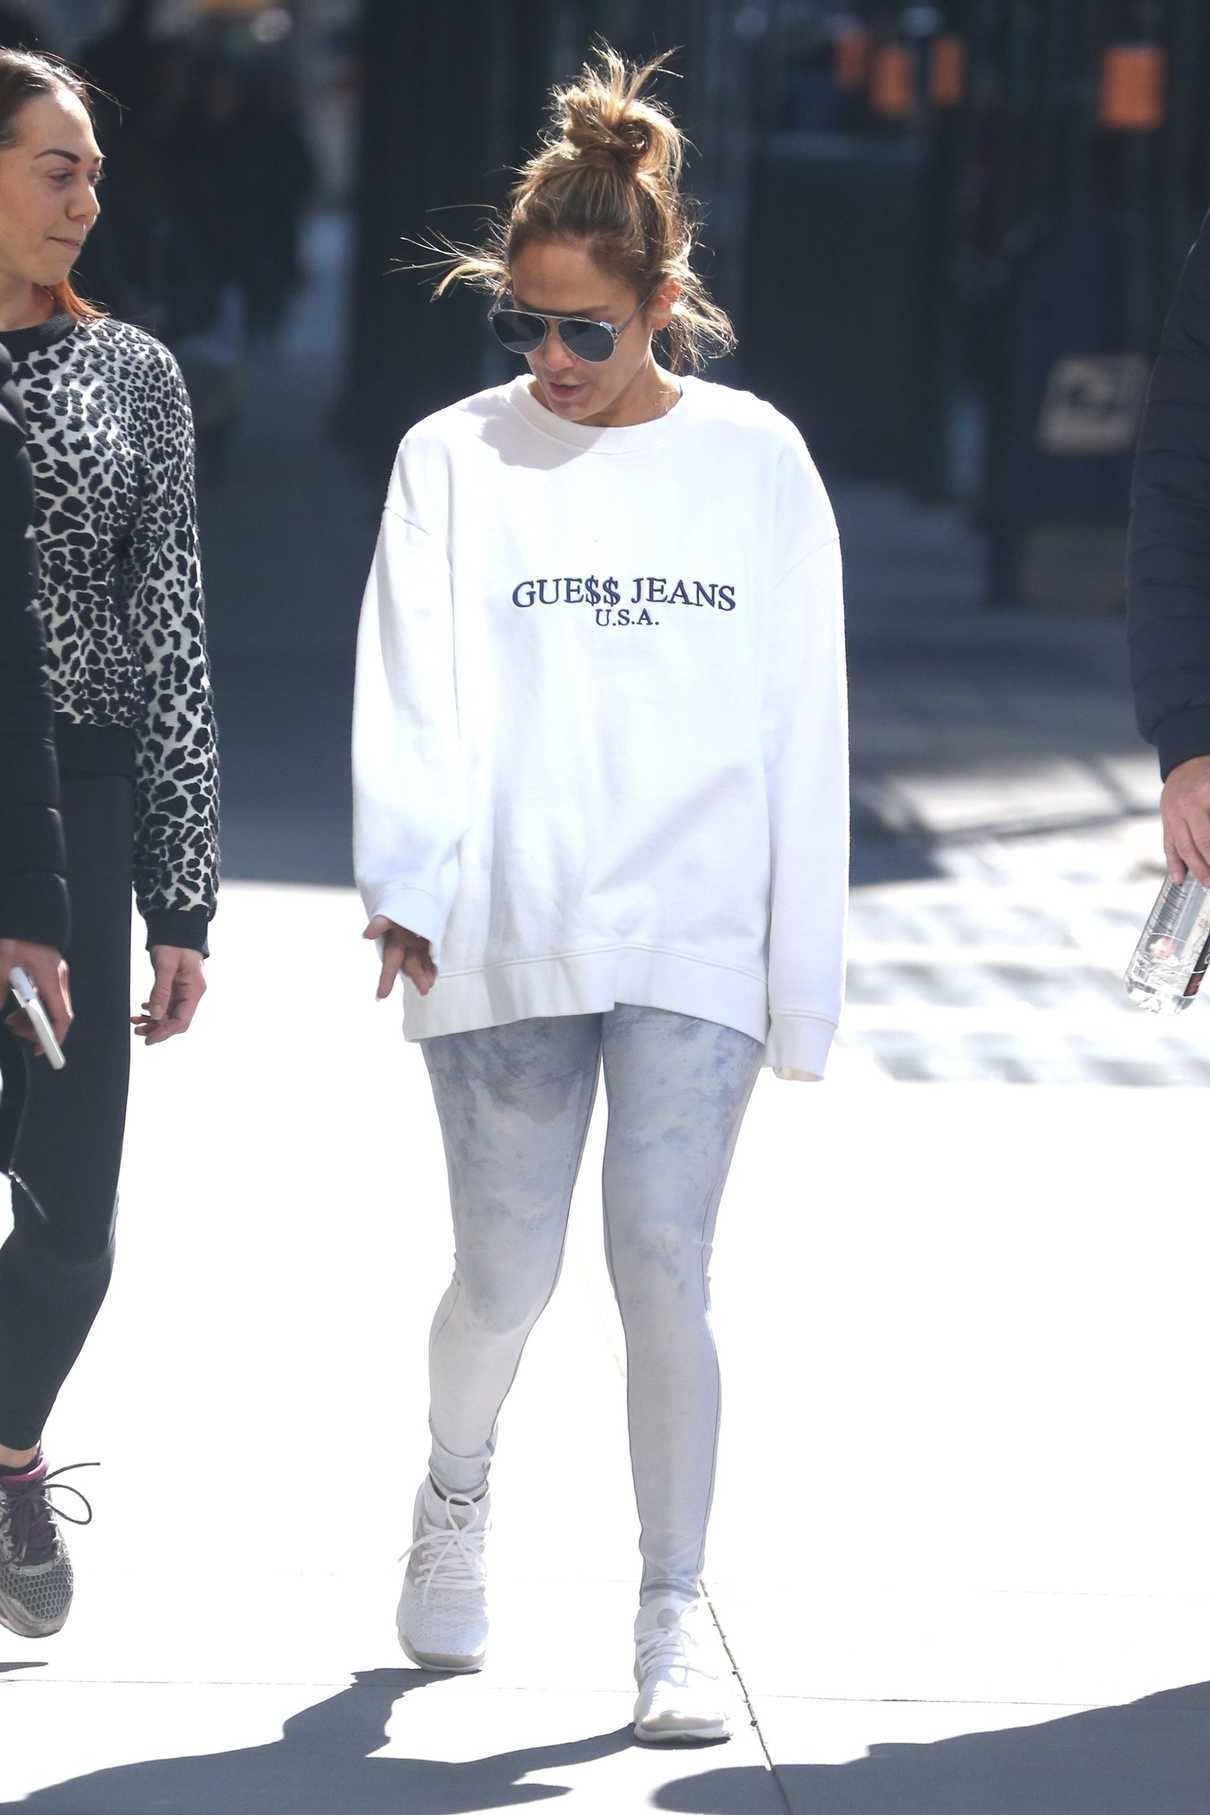 Jennifer Lopez in a White Guess Sweatshirt Hits the Gym in NYC 03/20 ...